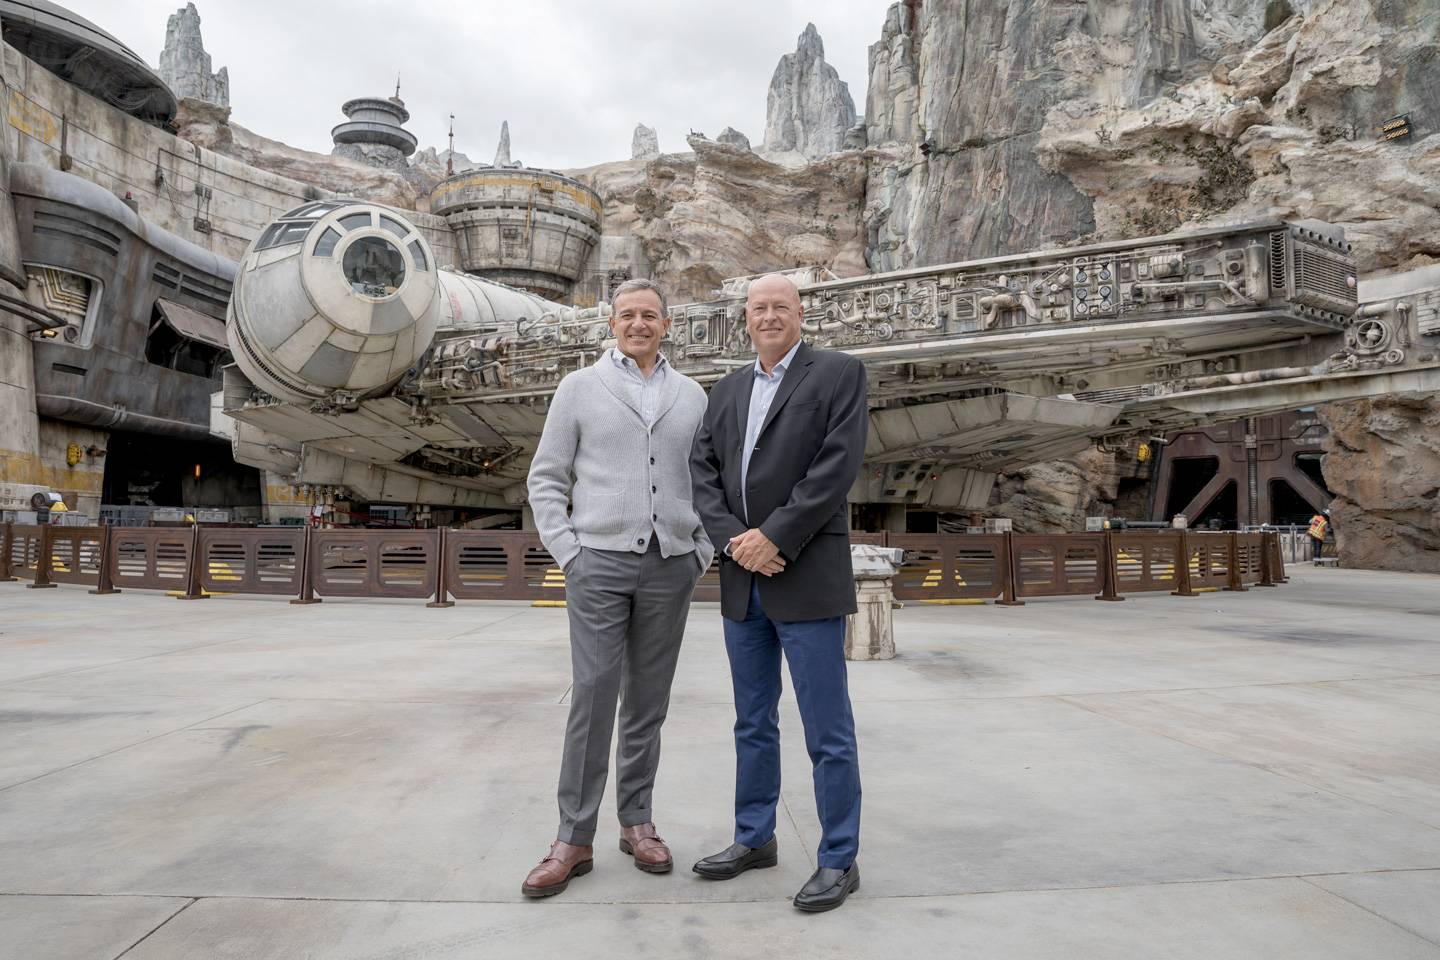 Bob Iger (left) assumes Role of Executive Chairman through 2021, Bob Chapek (right) is the new Disney CEO